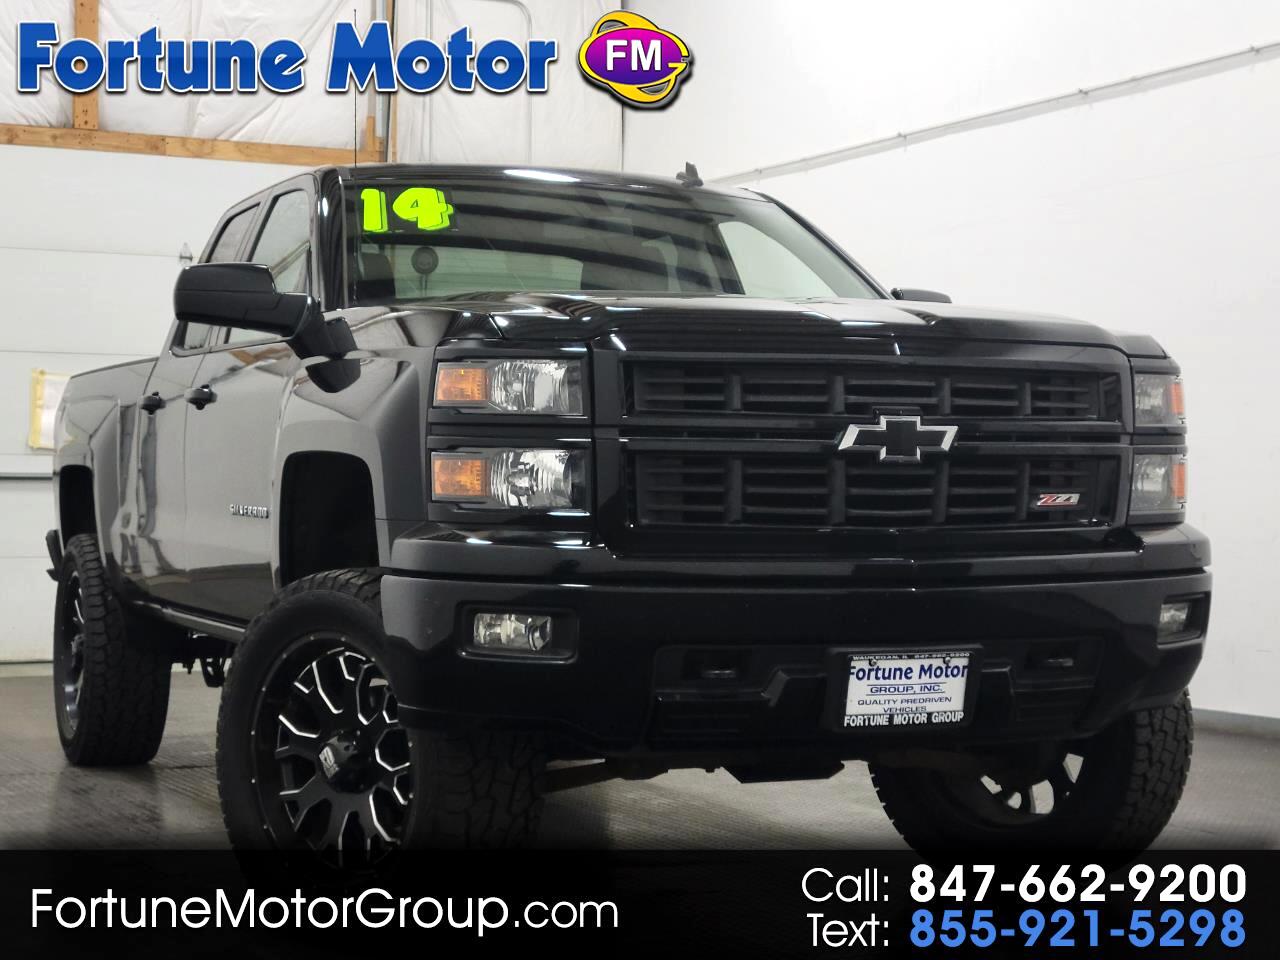 Used 14 Chevrolet Silverado 1500 4wd Double Cab 143 5 Lt W 2lt For Sale In Waukegan Il Fortune Motor Group Inc